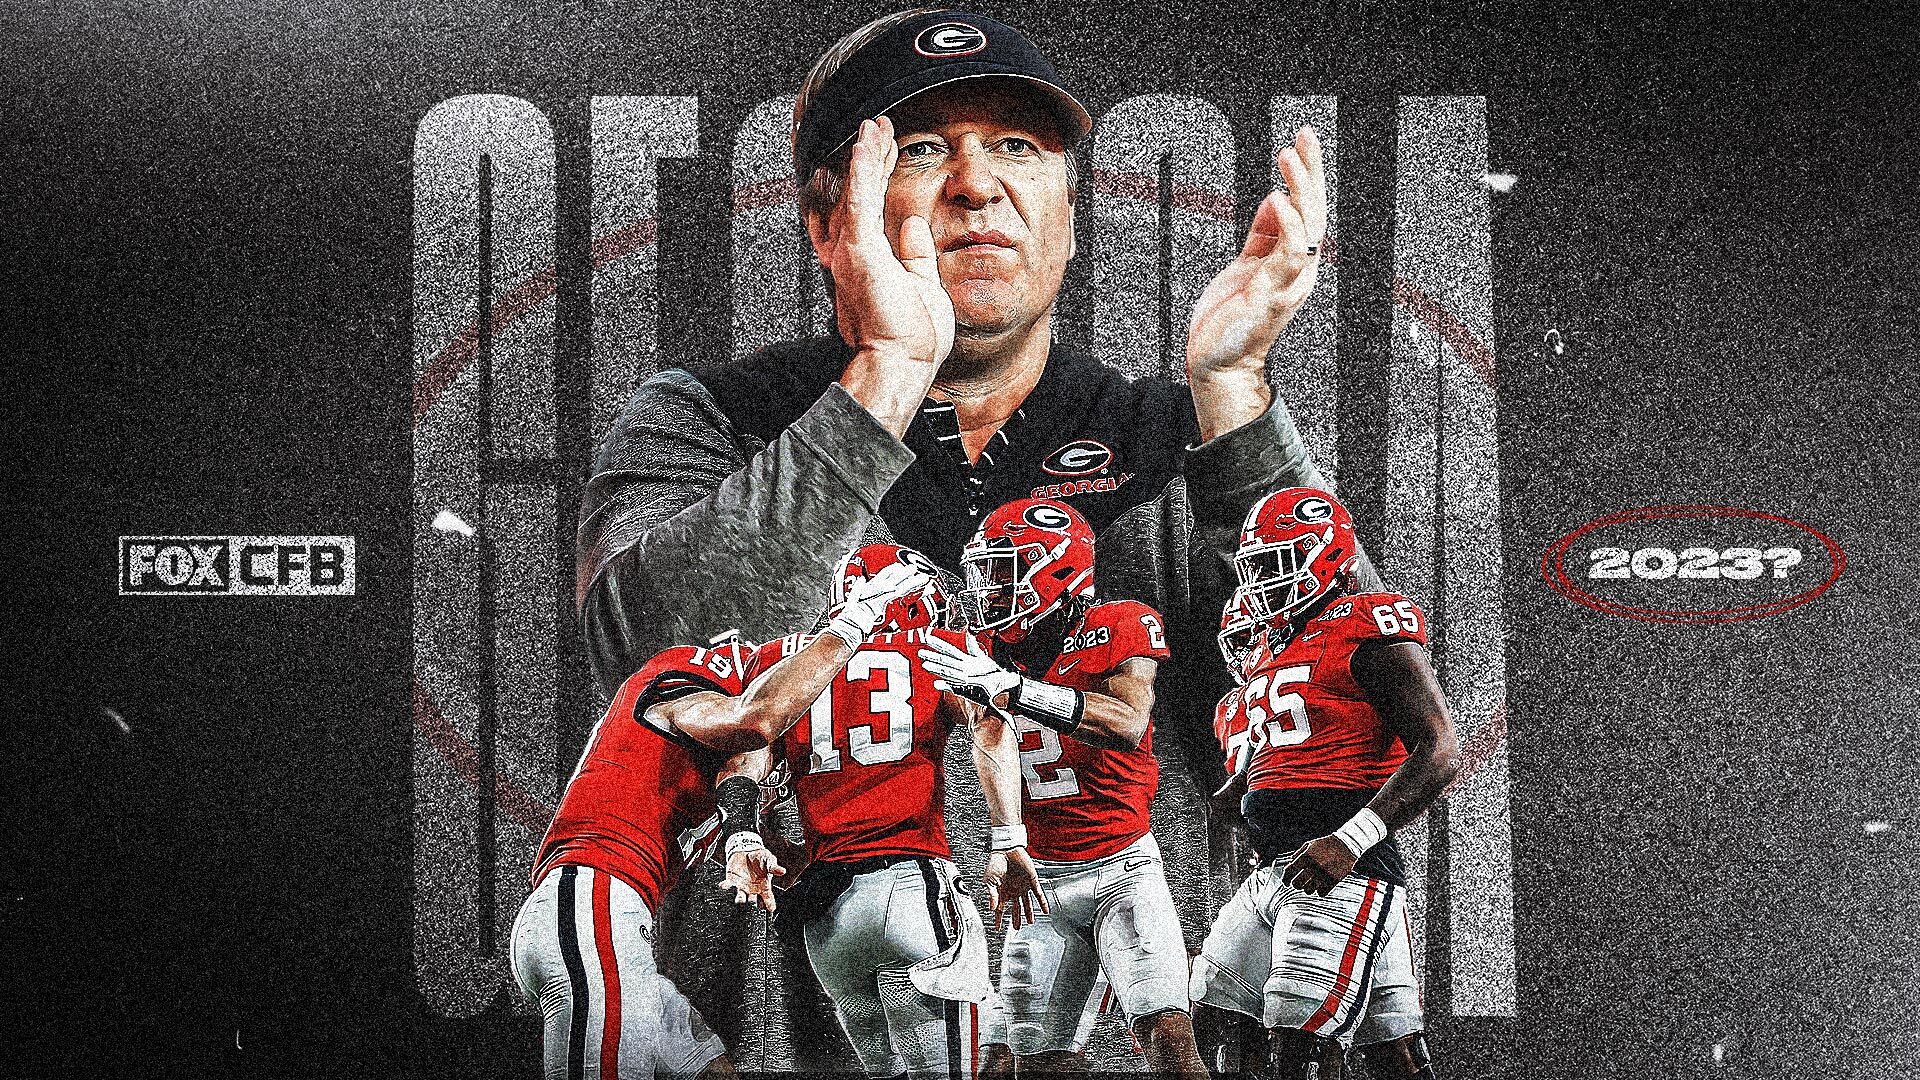 Georgia becomes 12th back-to-back champ in AP Top 25 history